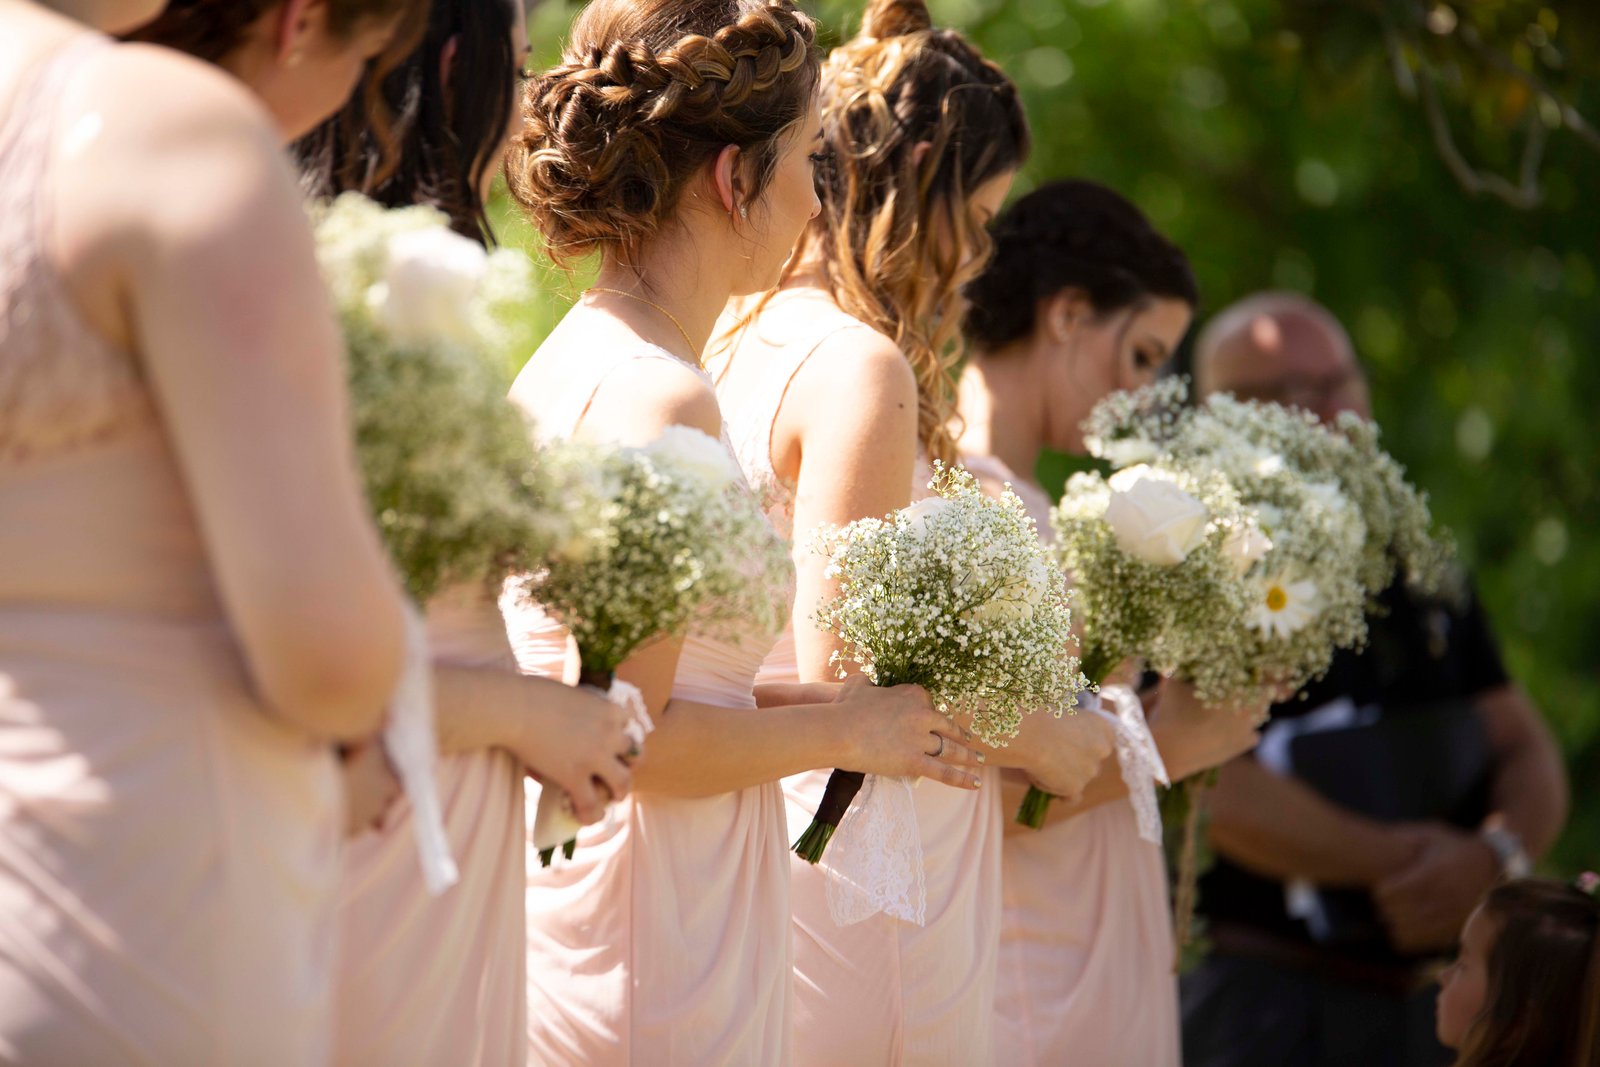 Bridesmaids holding bouquets of baby's breath